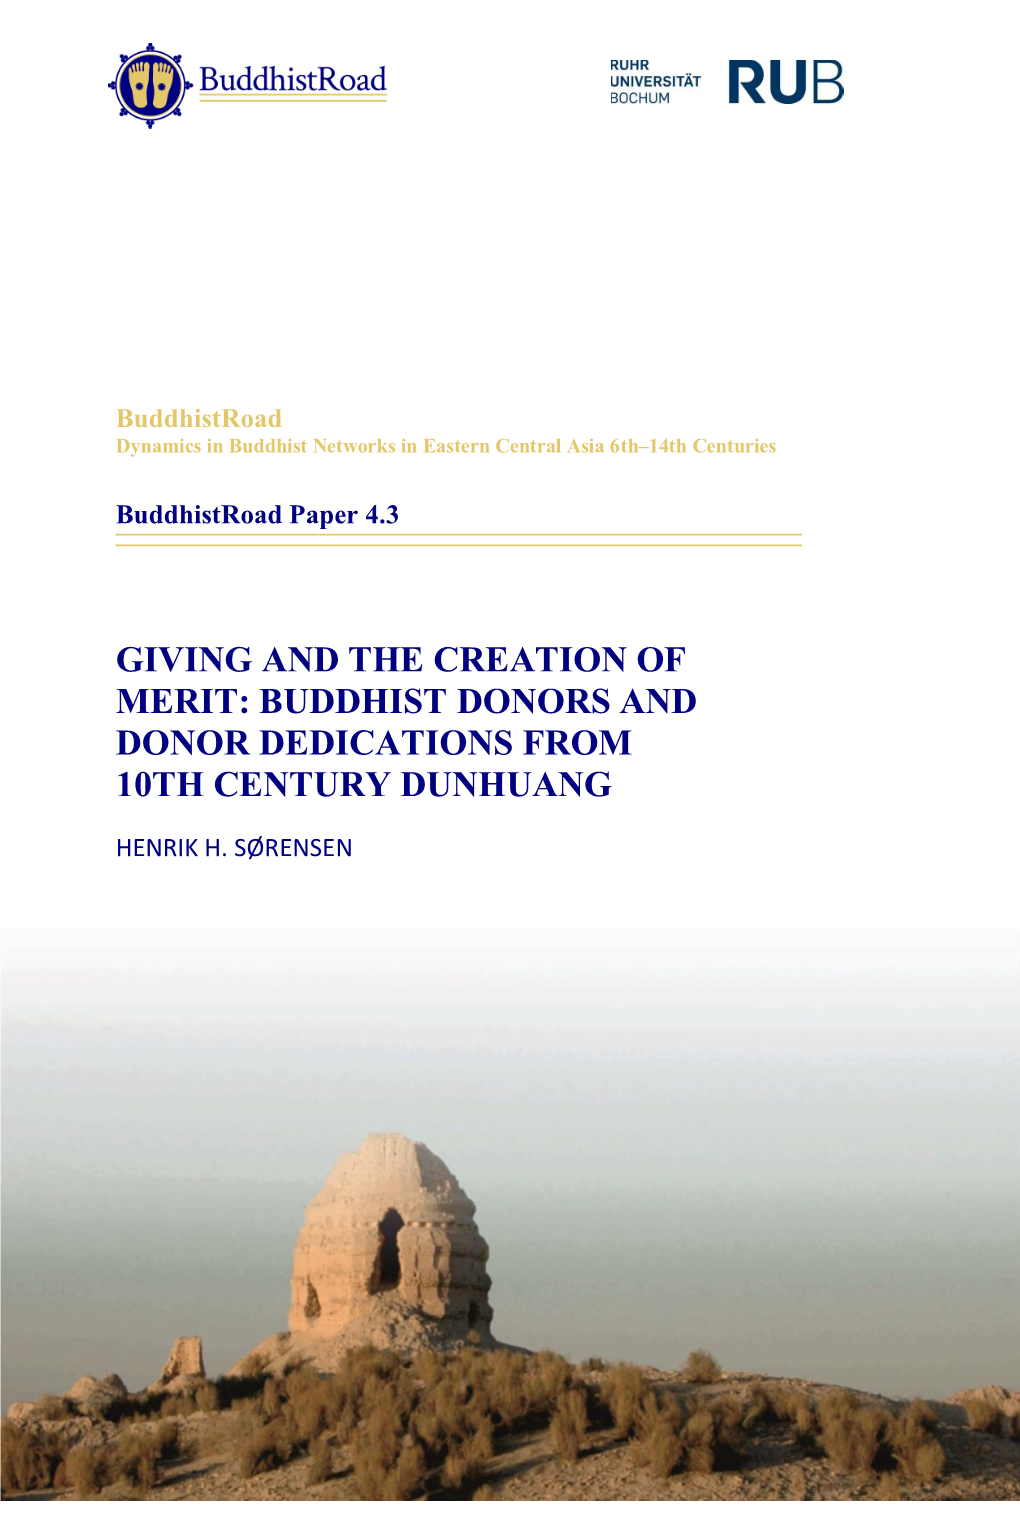 Buddhist Donors and Donor Dedications from 10Th Century Dunhuang